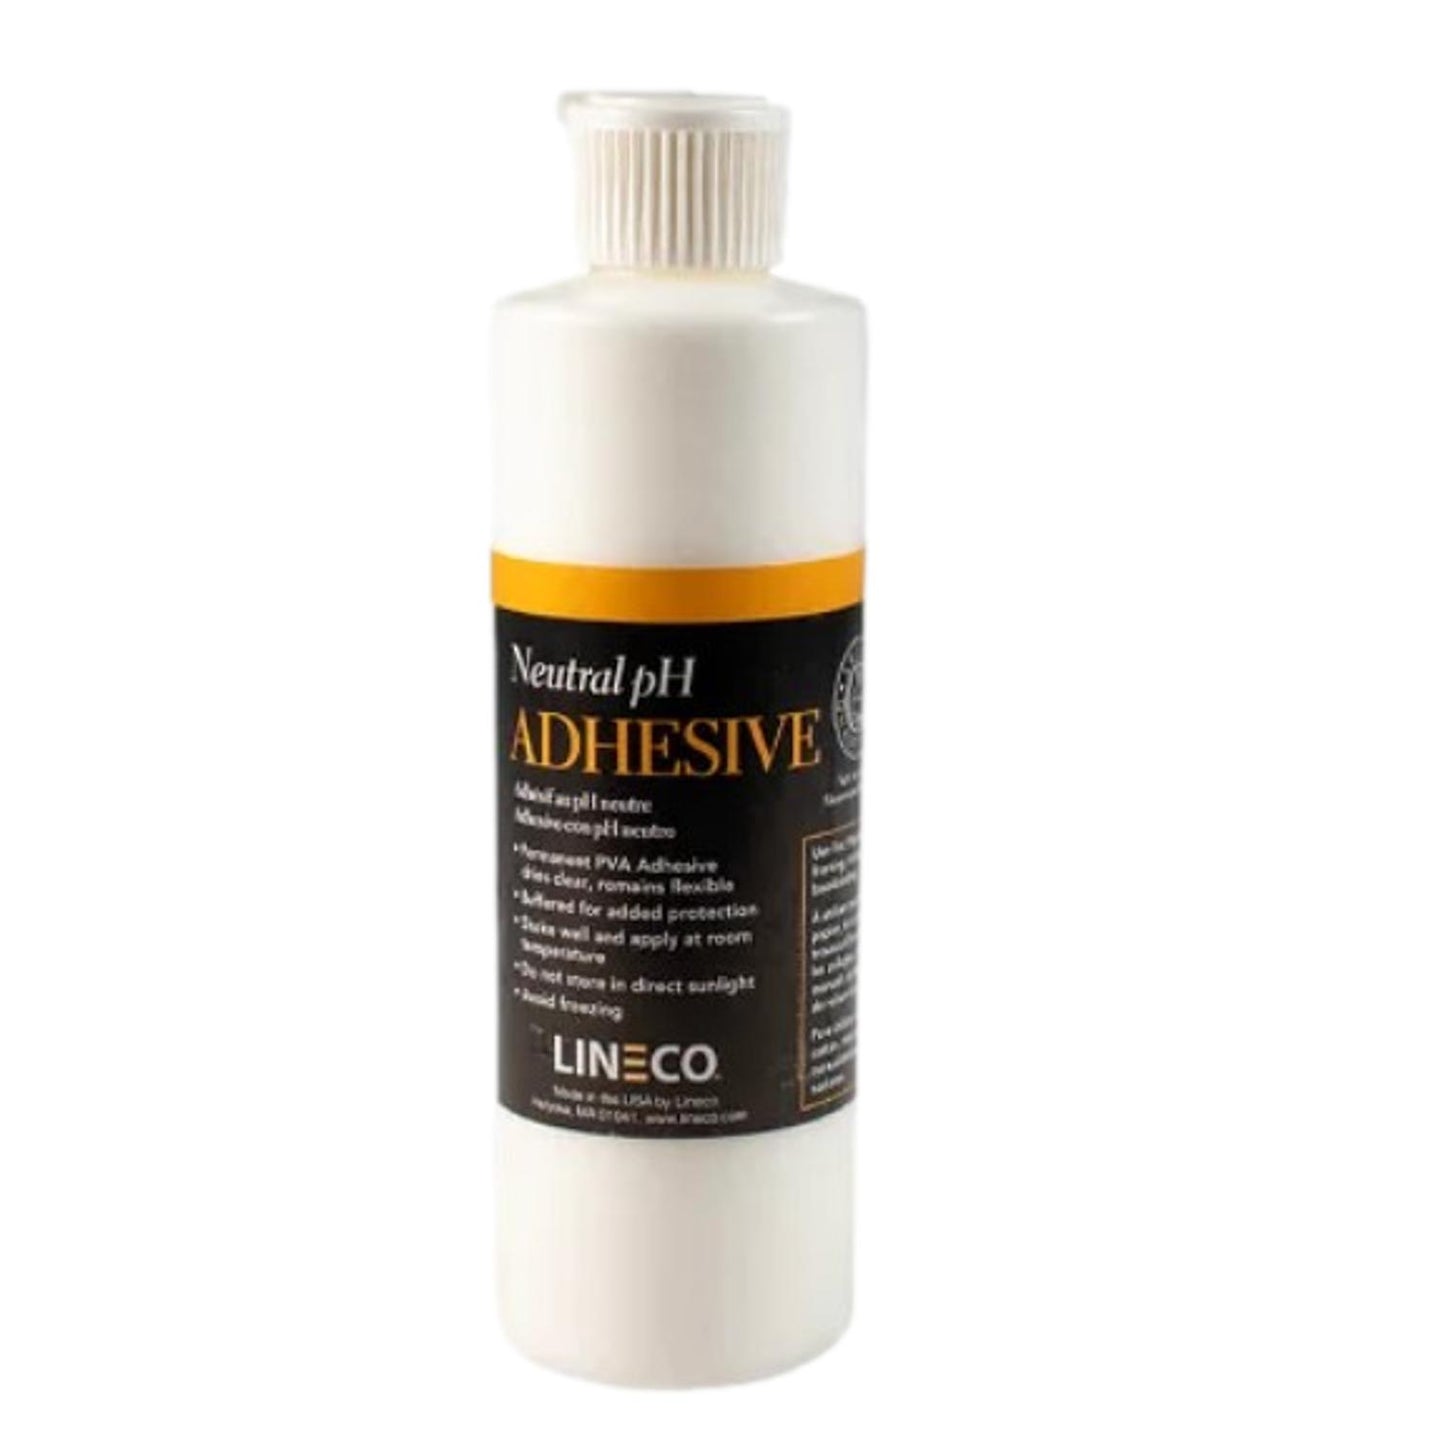 Lineco PVA Glue Adhesive Neutral pH 235ml For Paper Crafts Framing